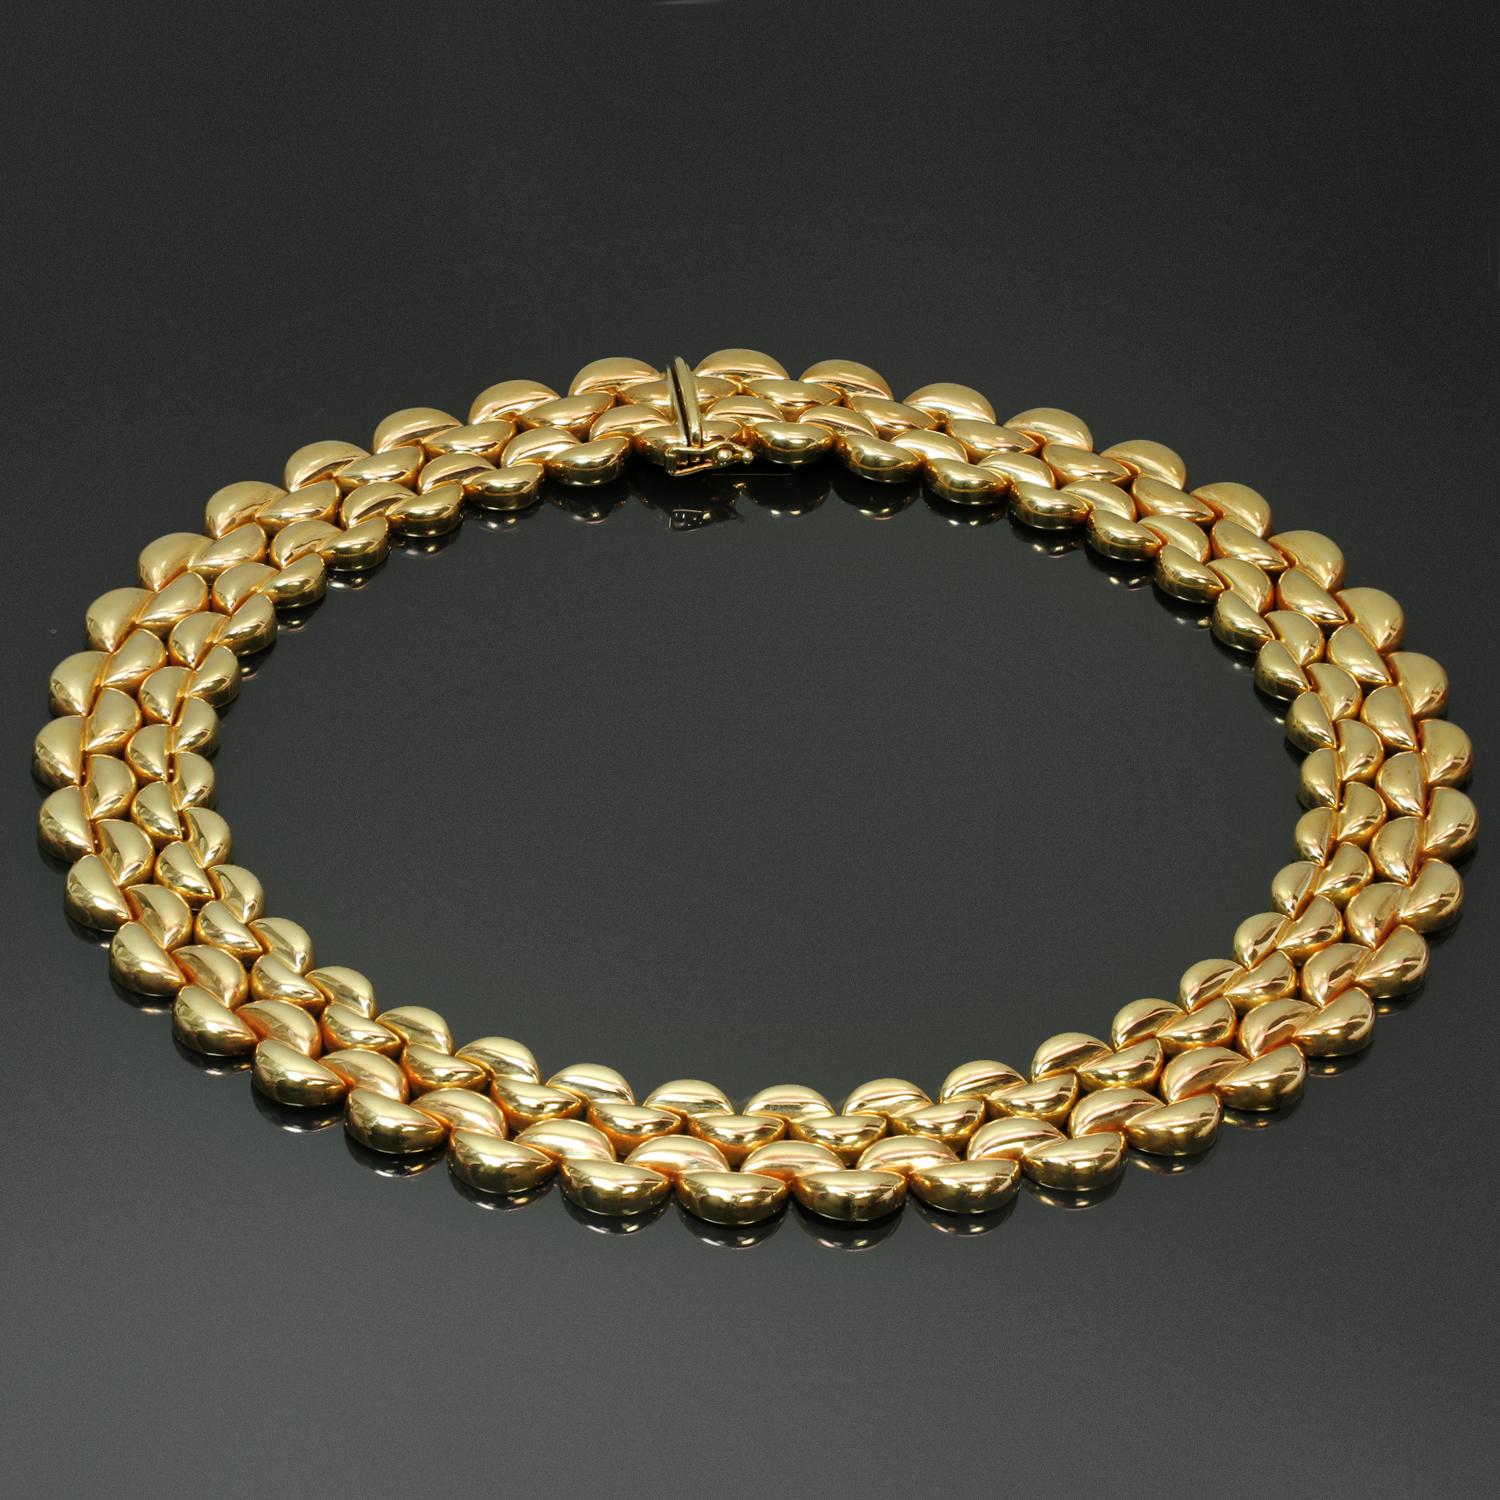 This fabulous authentic vintage Cartier collar necklace features 4 rows of geometric links crafted in 18k yellow gold. Made in France circa 1990s. Measurements: 0.78